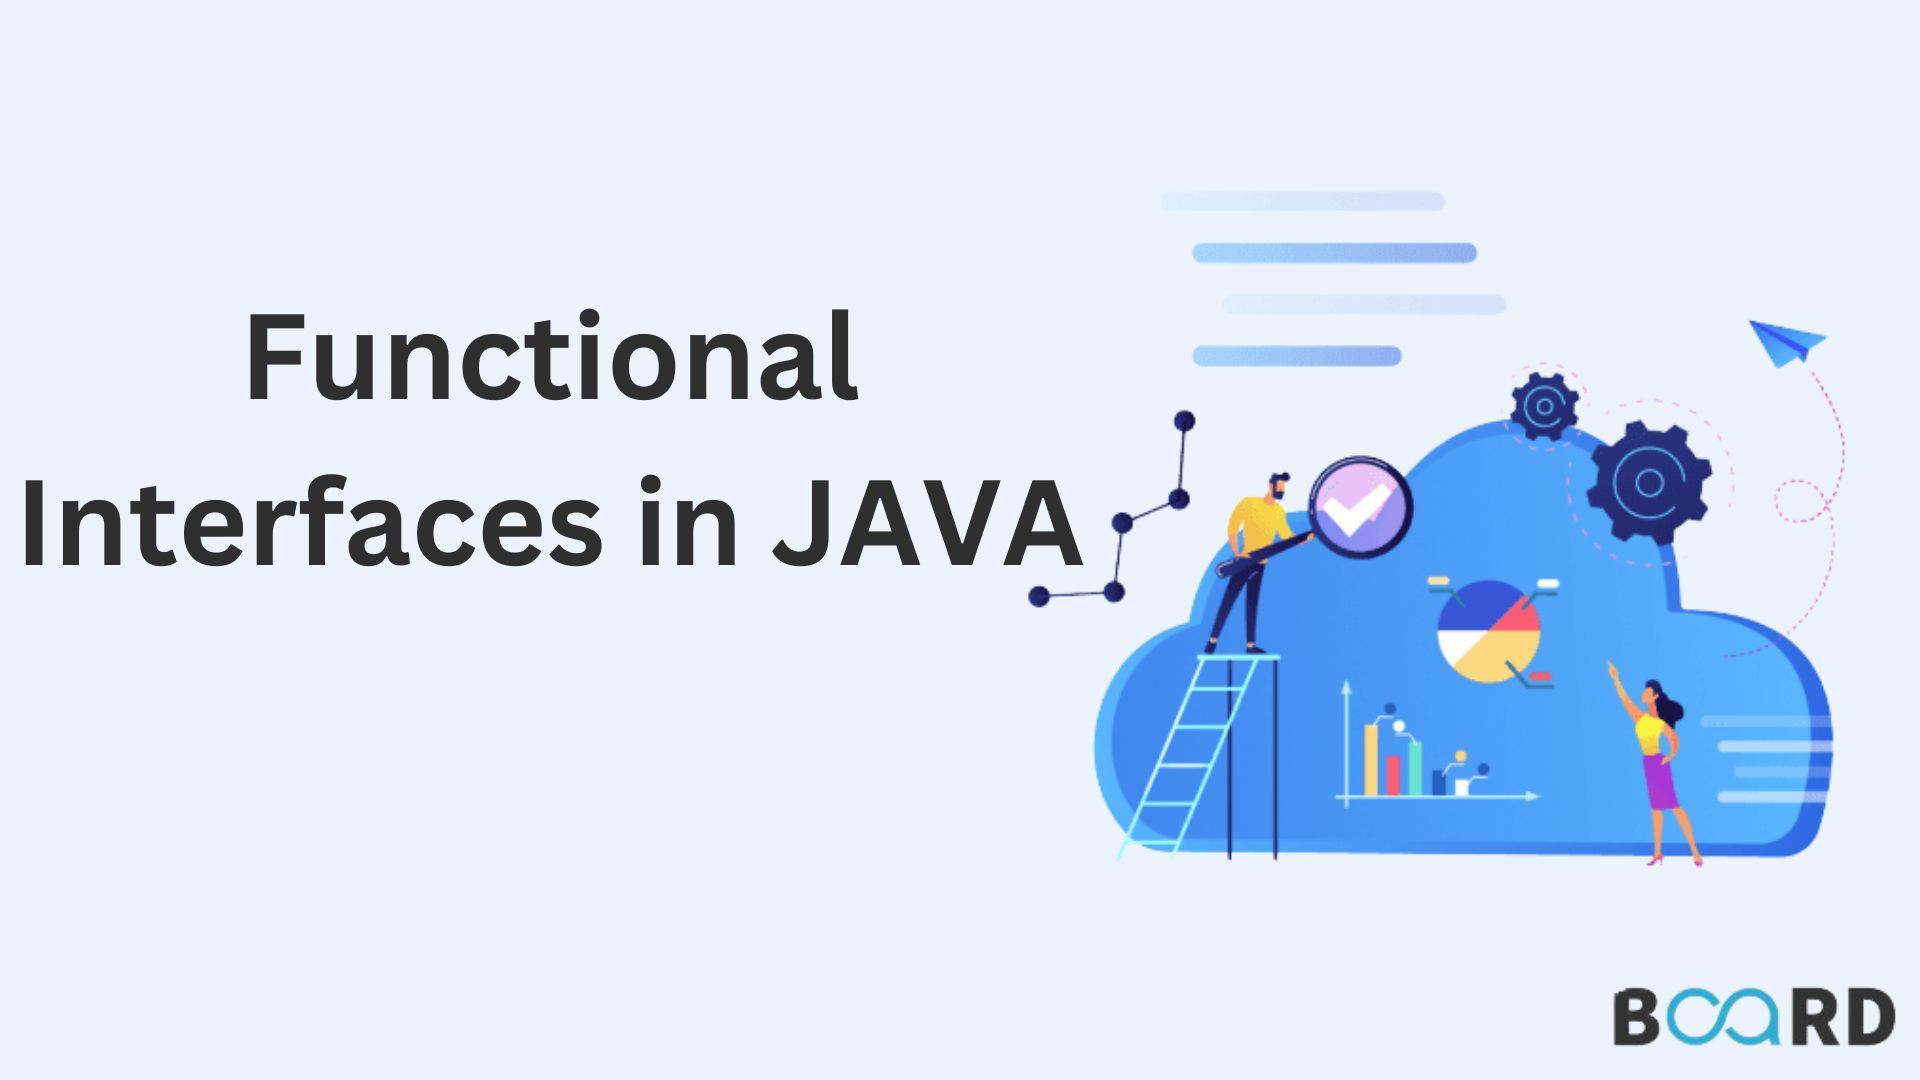 What are Functional Interfaces in Java?